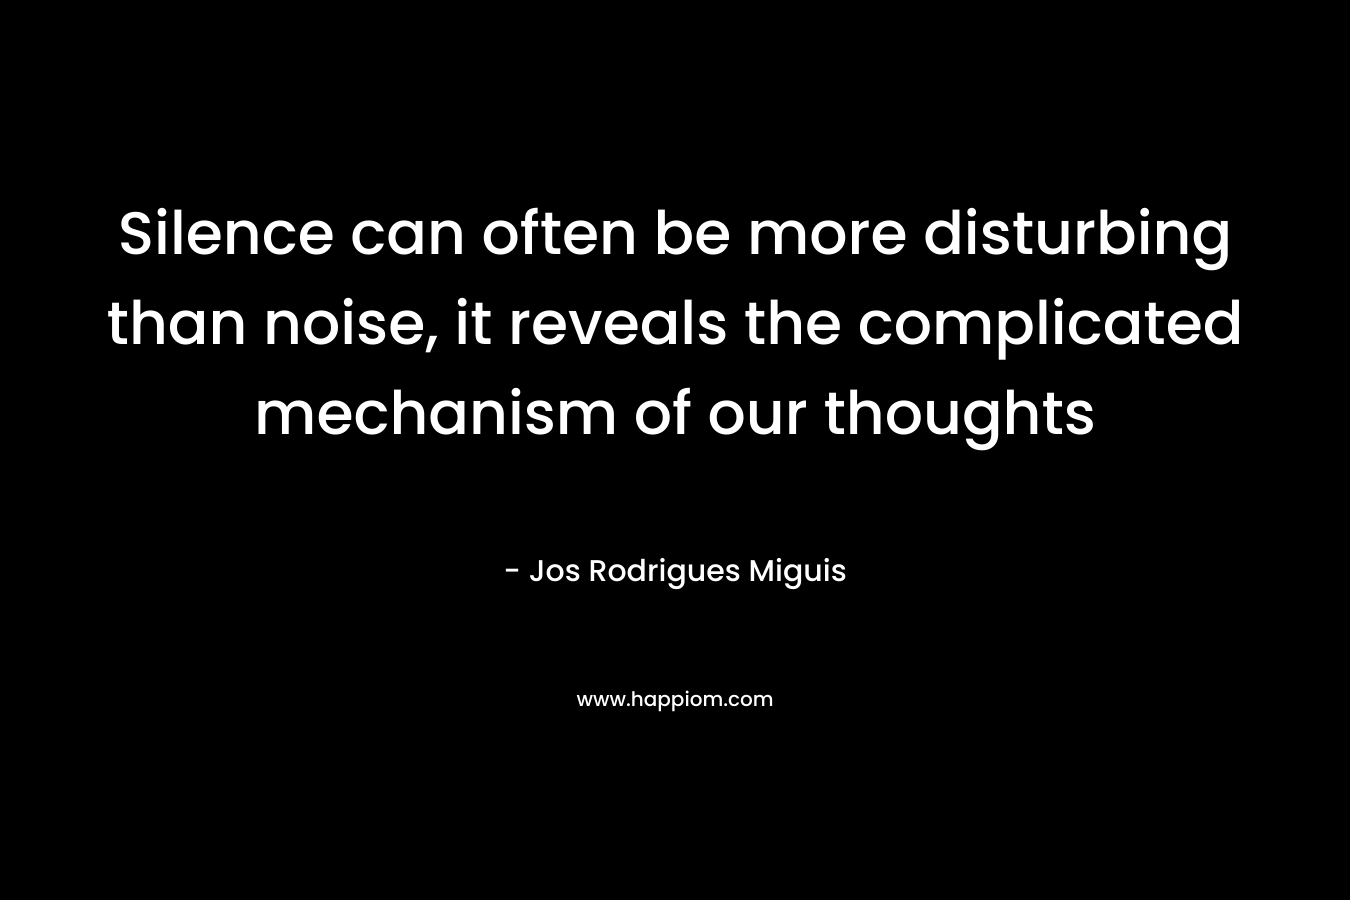 Silence can often be more disturbing than noise, it reveals the complicated mechanism of our thoughts – Jos Rodrigues Miguis